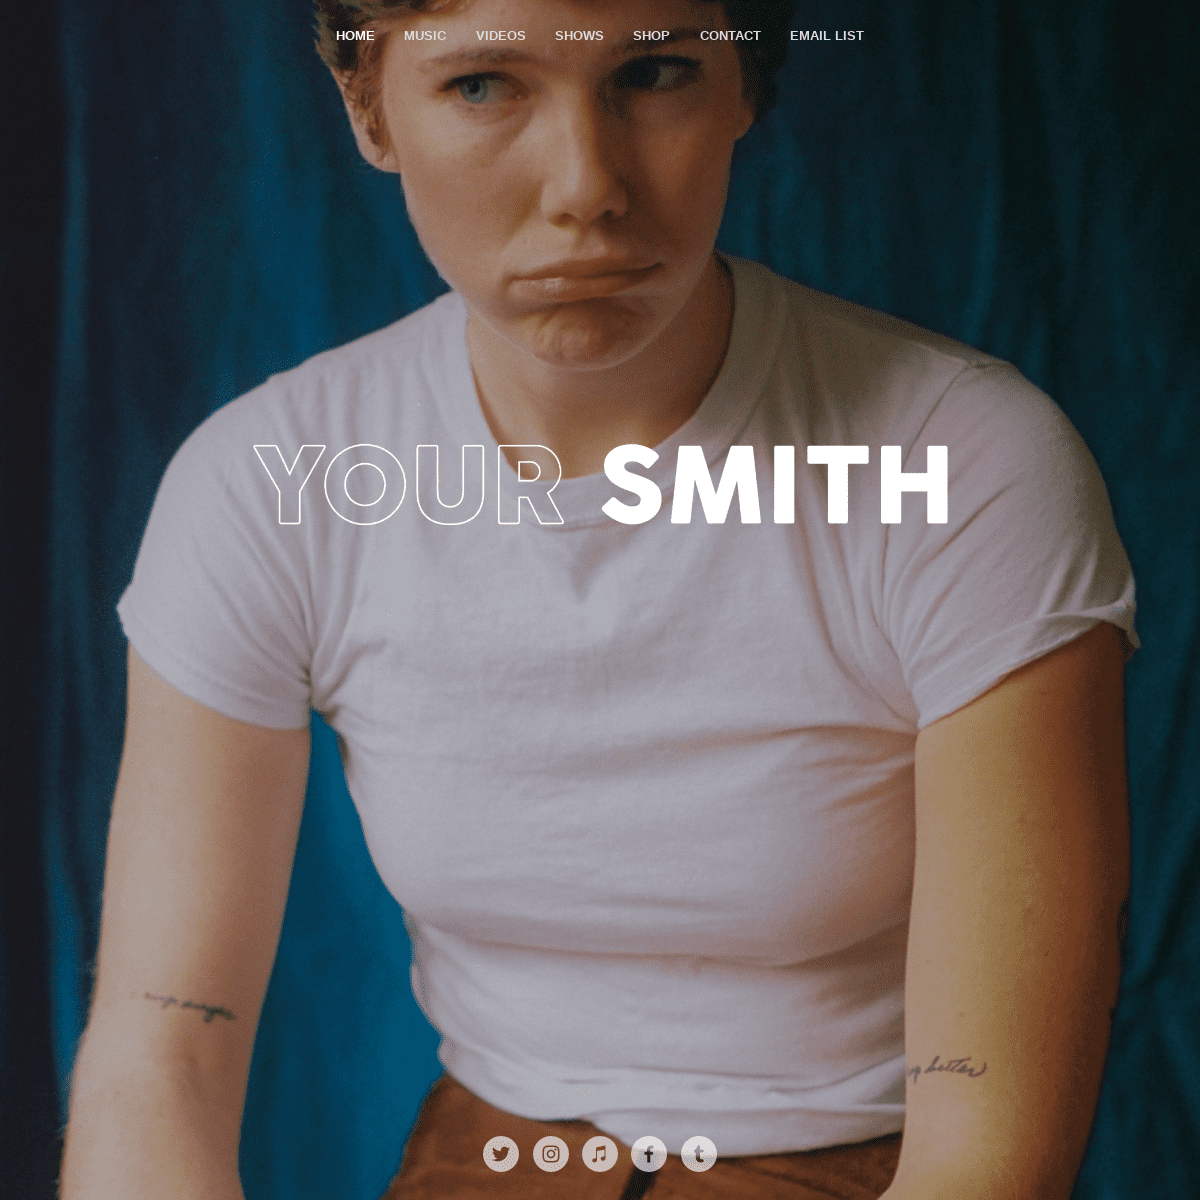 YOUR SMITH